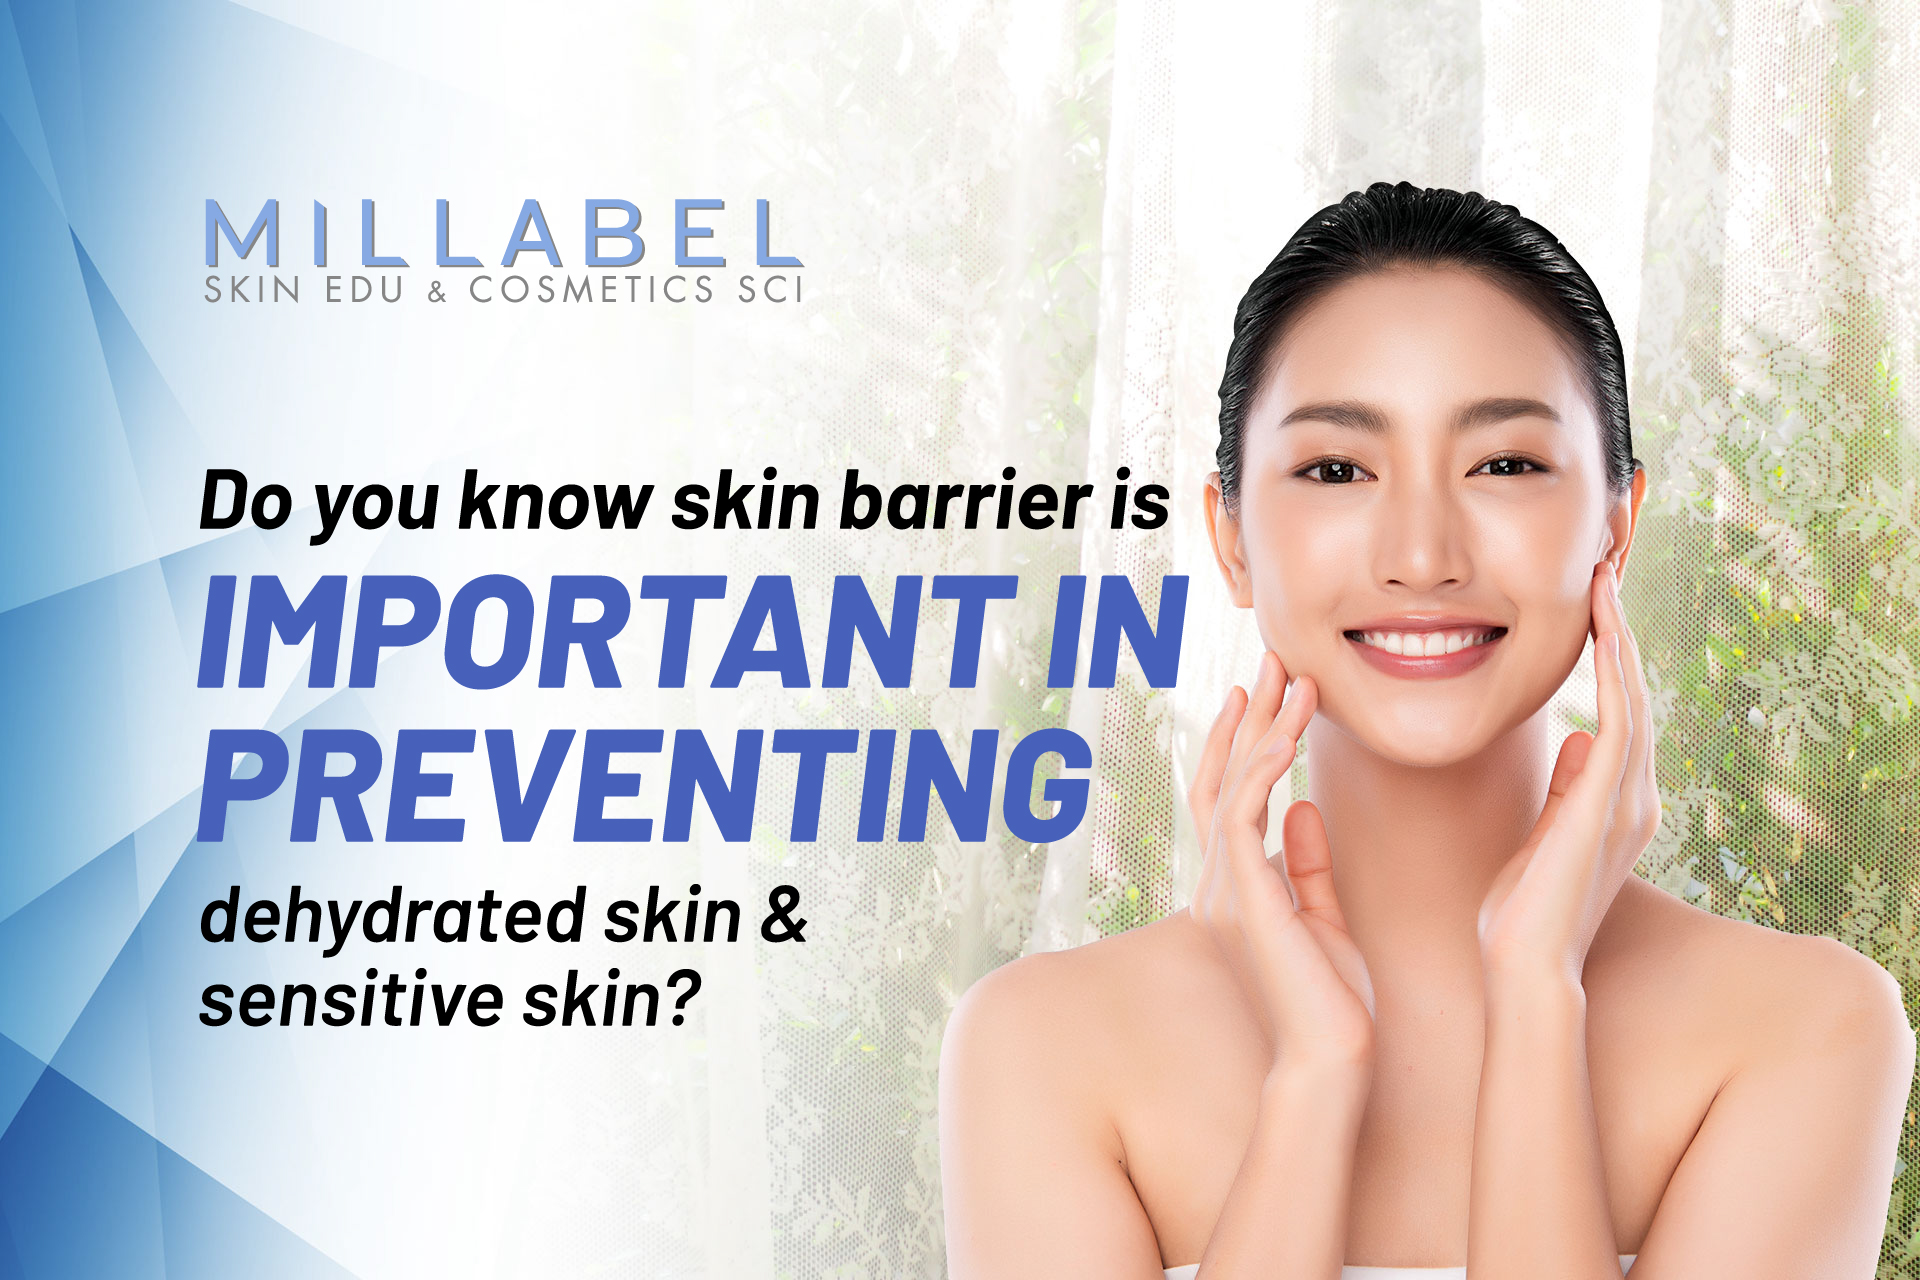 Taking Care of Your Skin Barrier Helps you to prevent skin issues #保护皮肤屏障，持有靓丽肌肤！